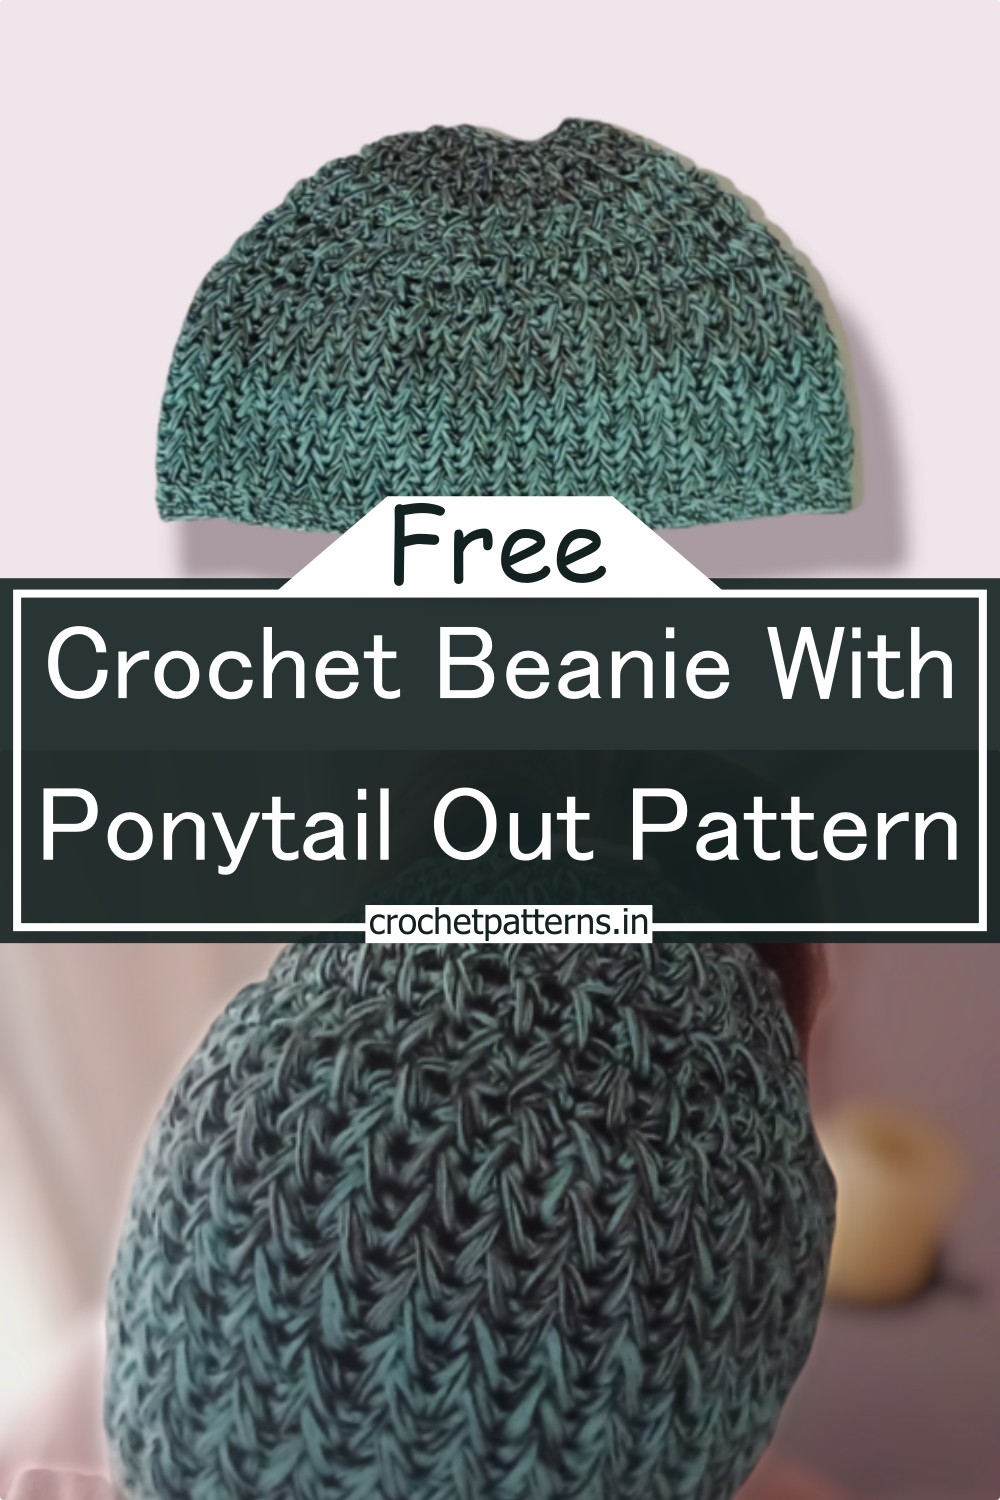 Crochet Beanie With Ponytail Out Pattern